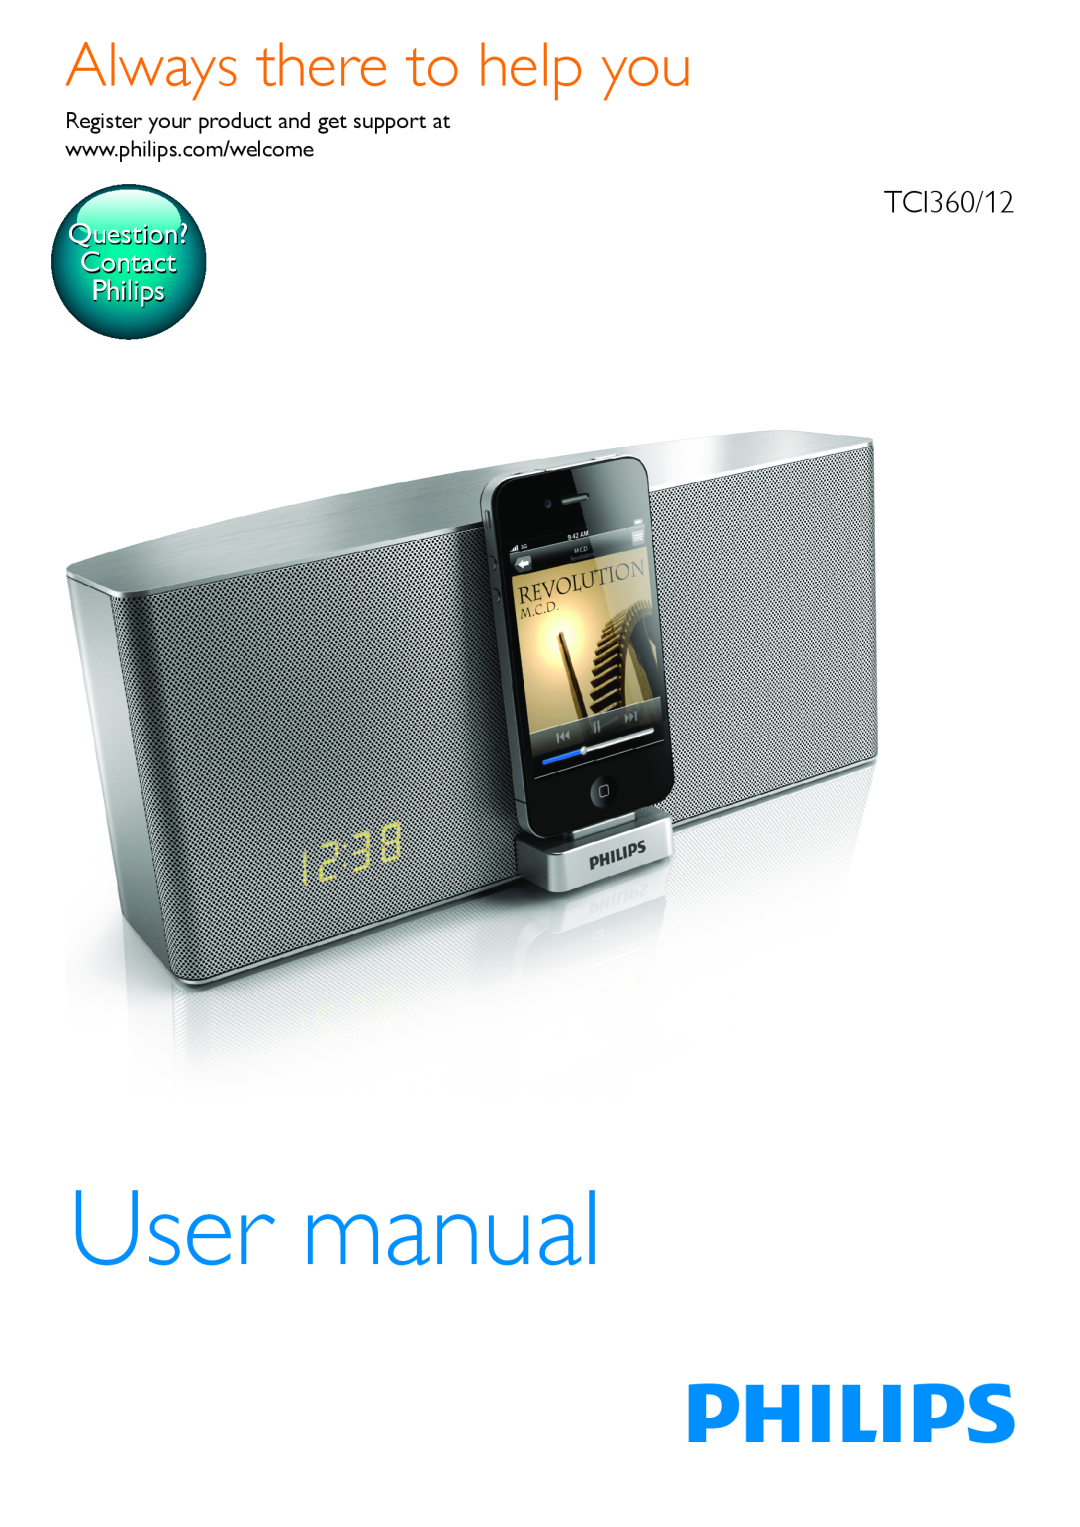 Philips TCI360/12 user manual User manual, Always there to help you, Question? Contact Philips 